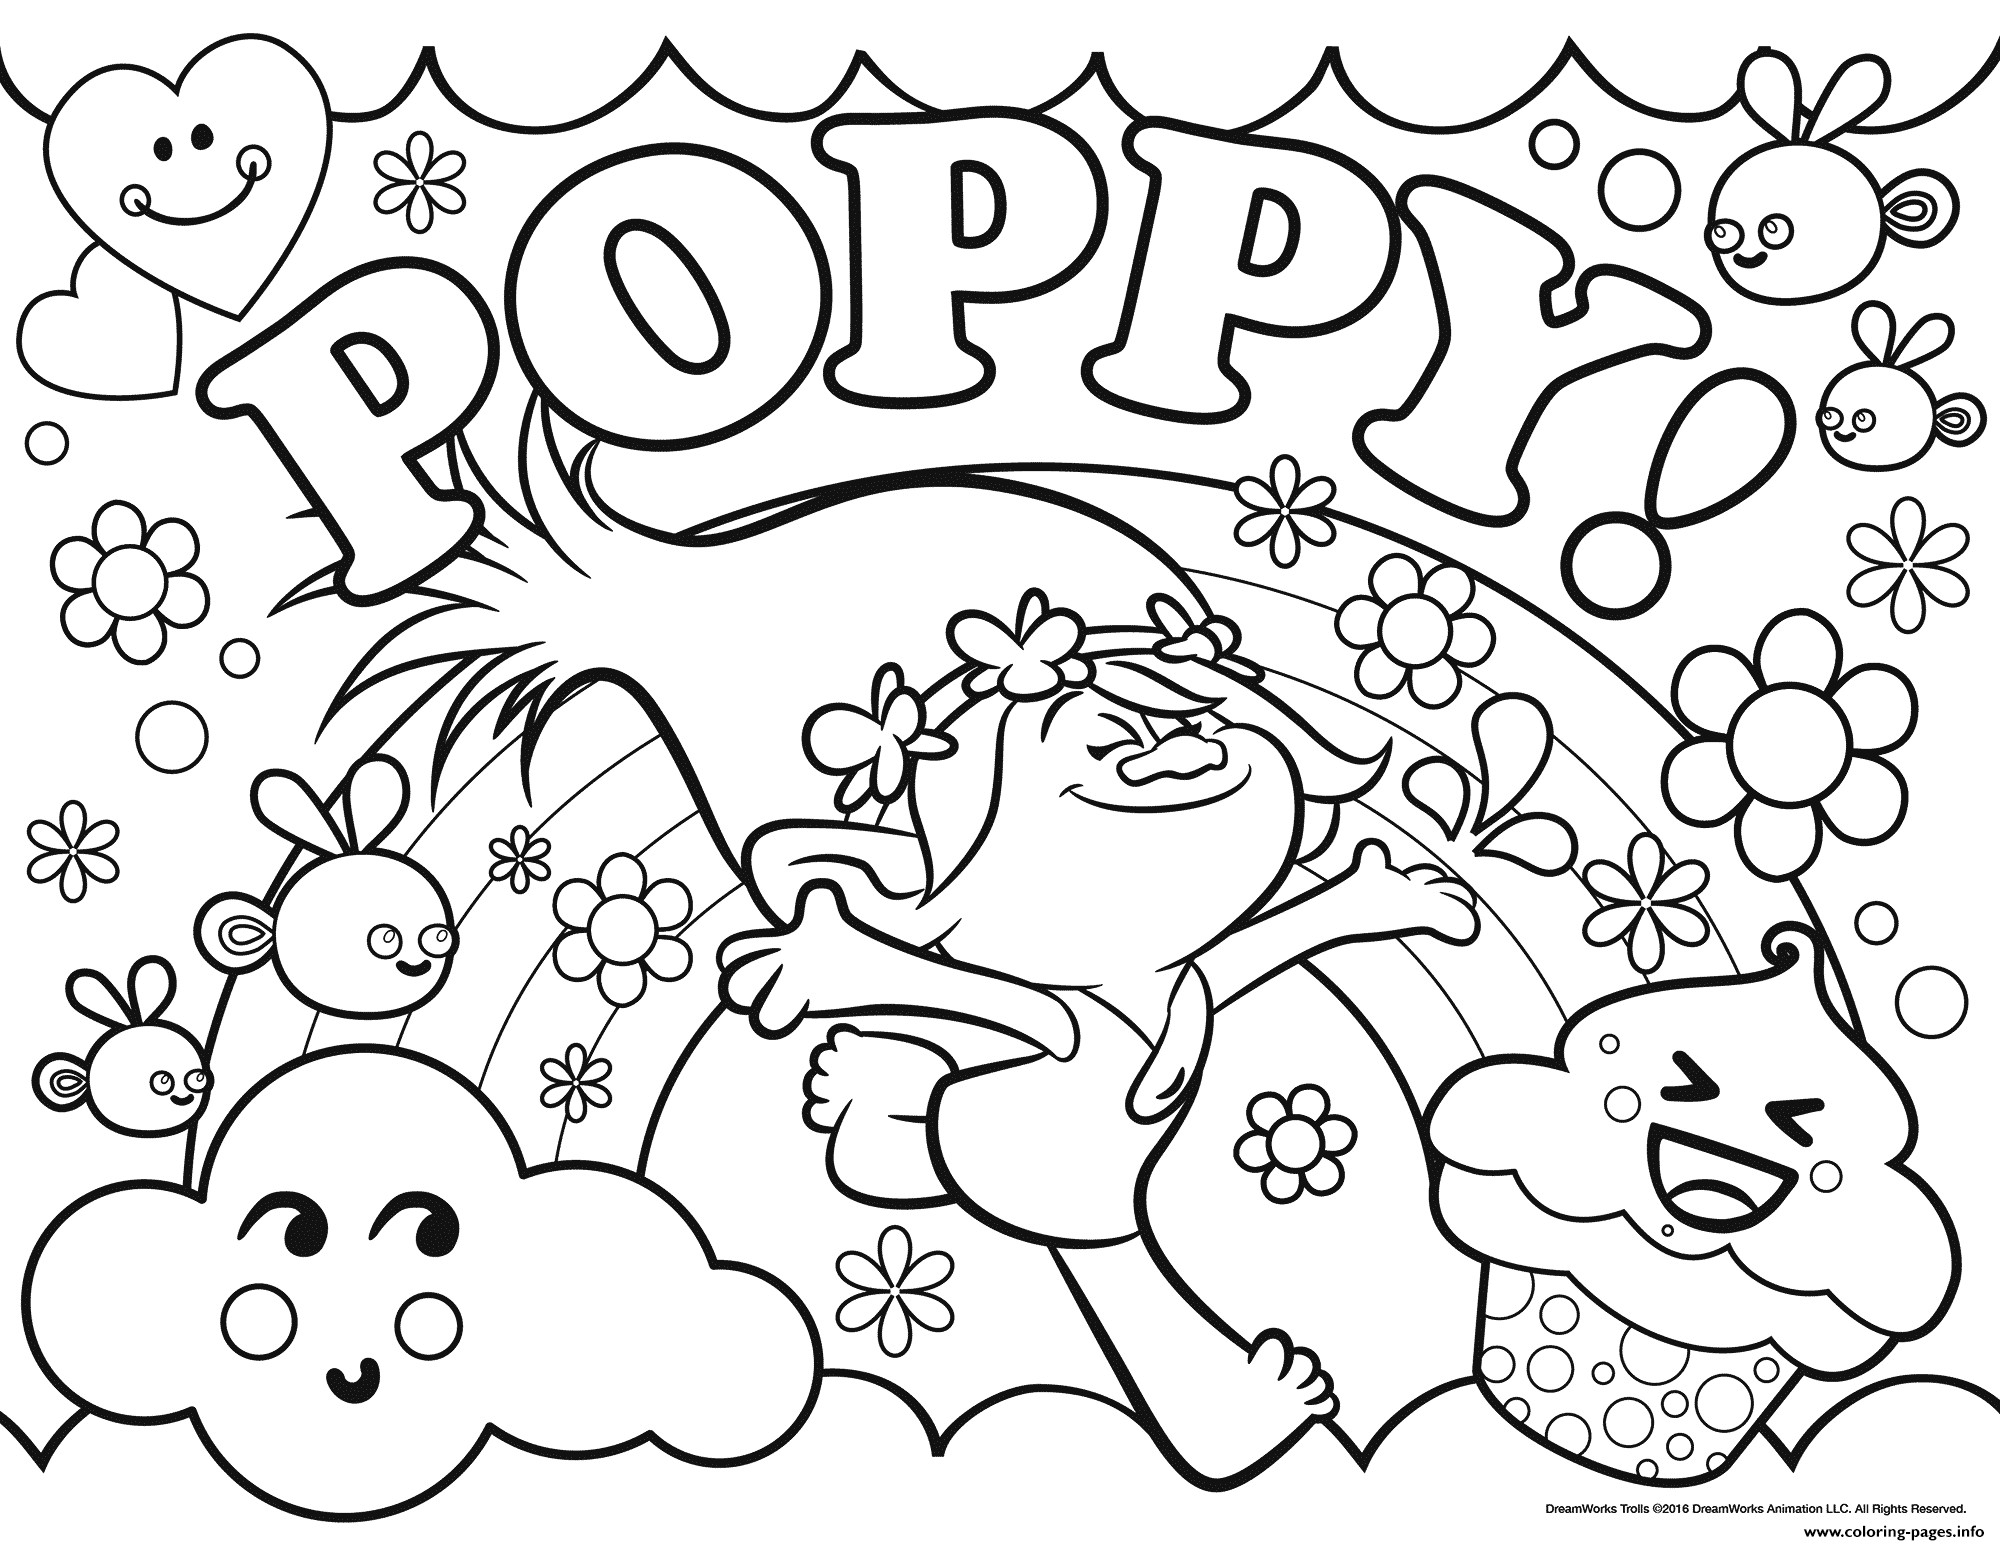 Trolls Printable Coloring Pages Wallpaper